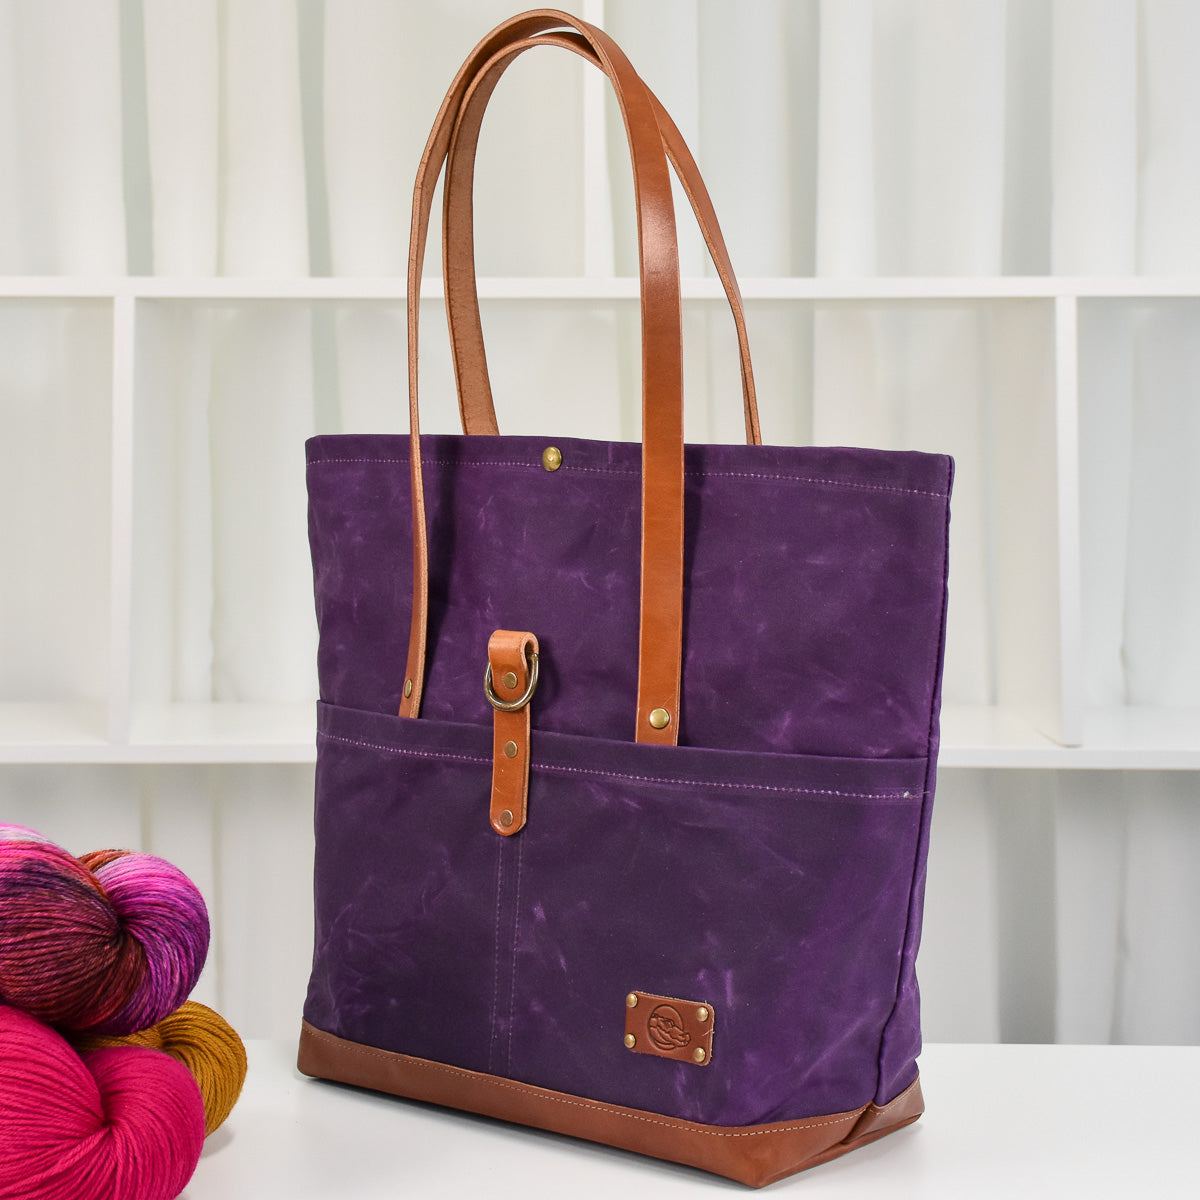 Purple Bag No. 3 with Caramel Leather - The Everywhere Bag